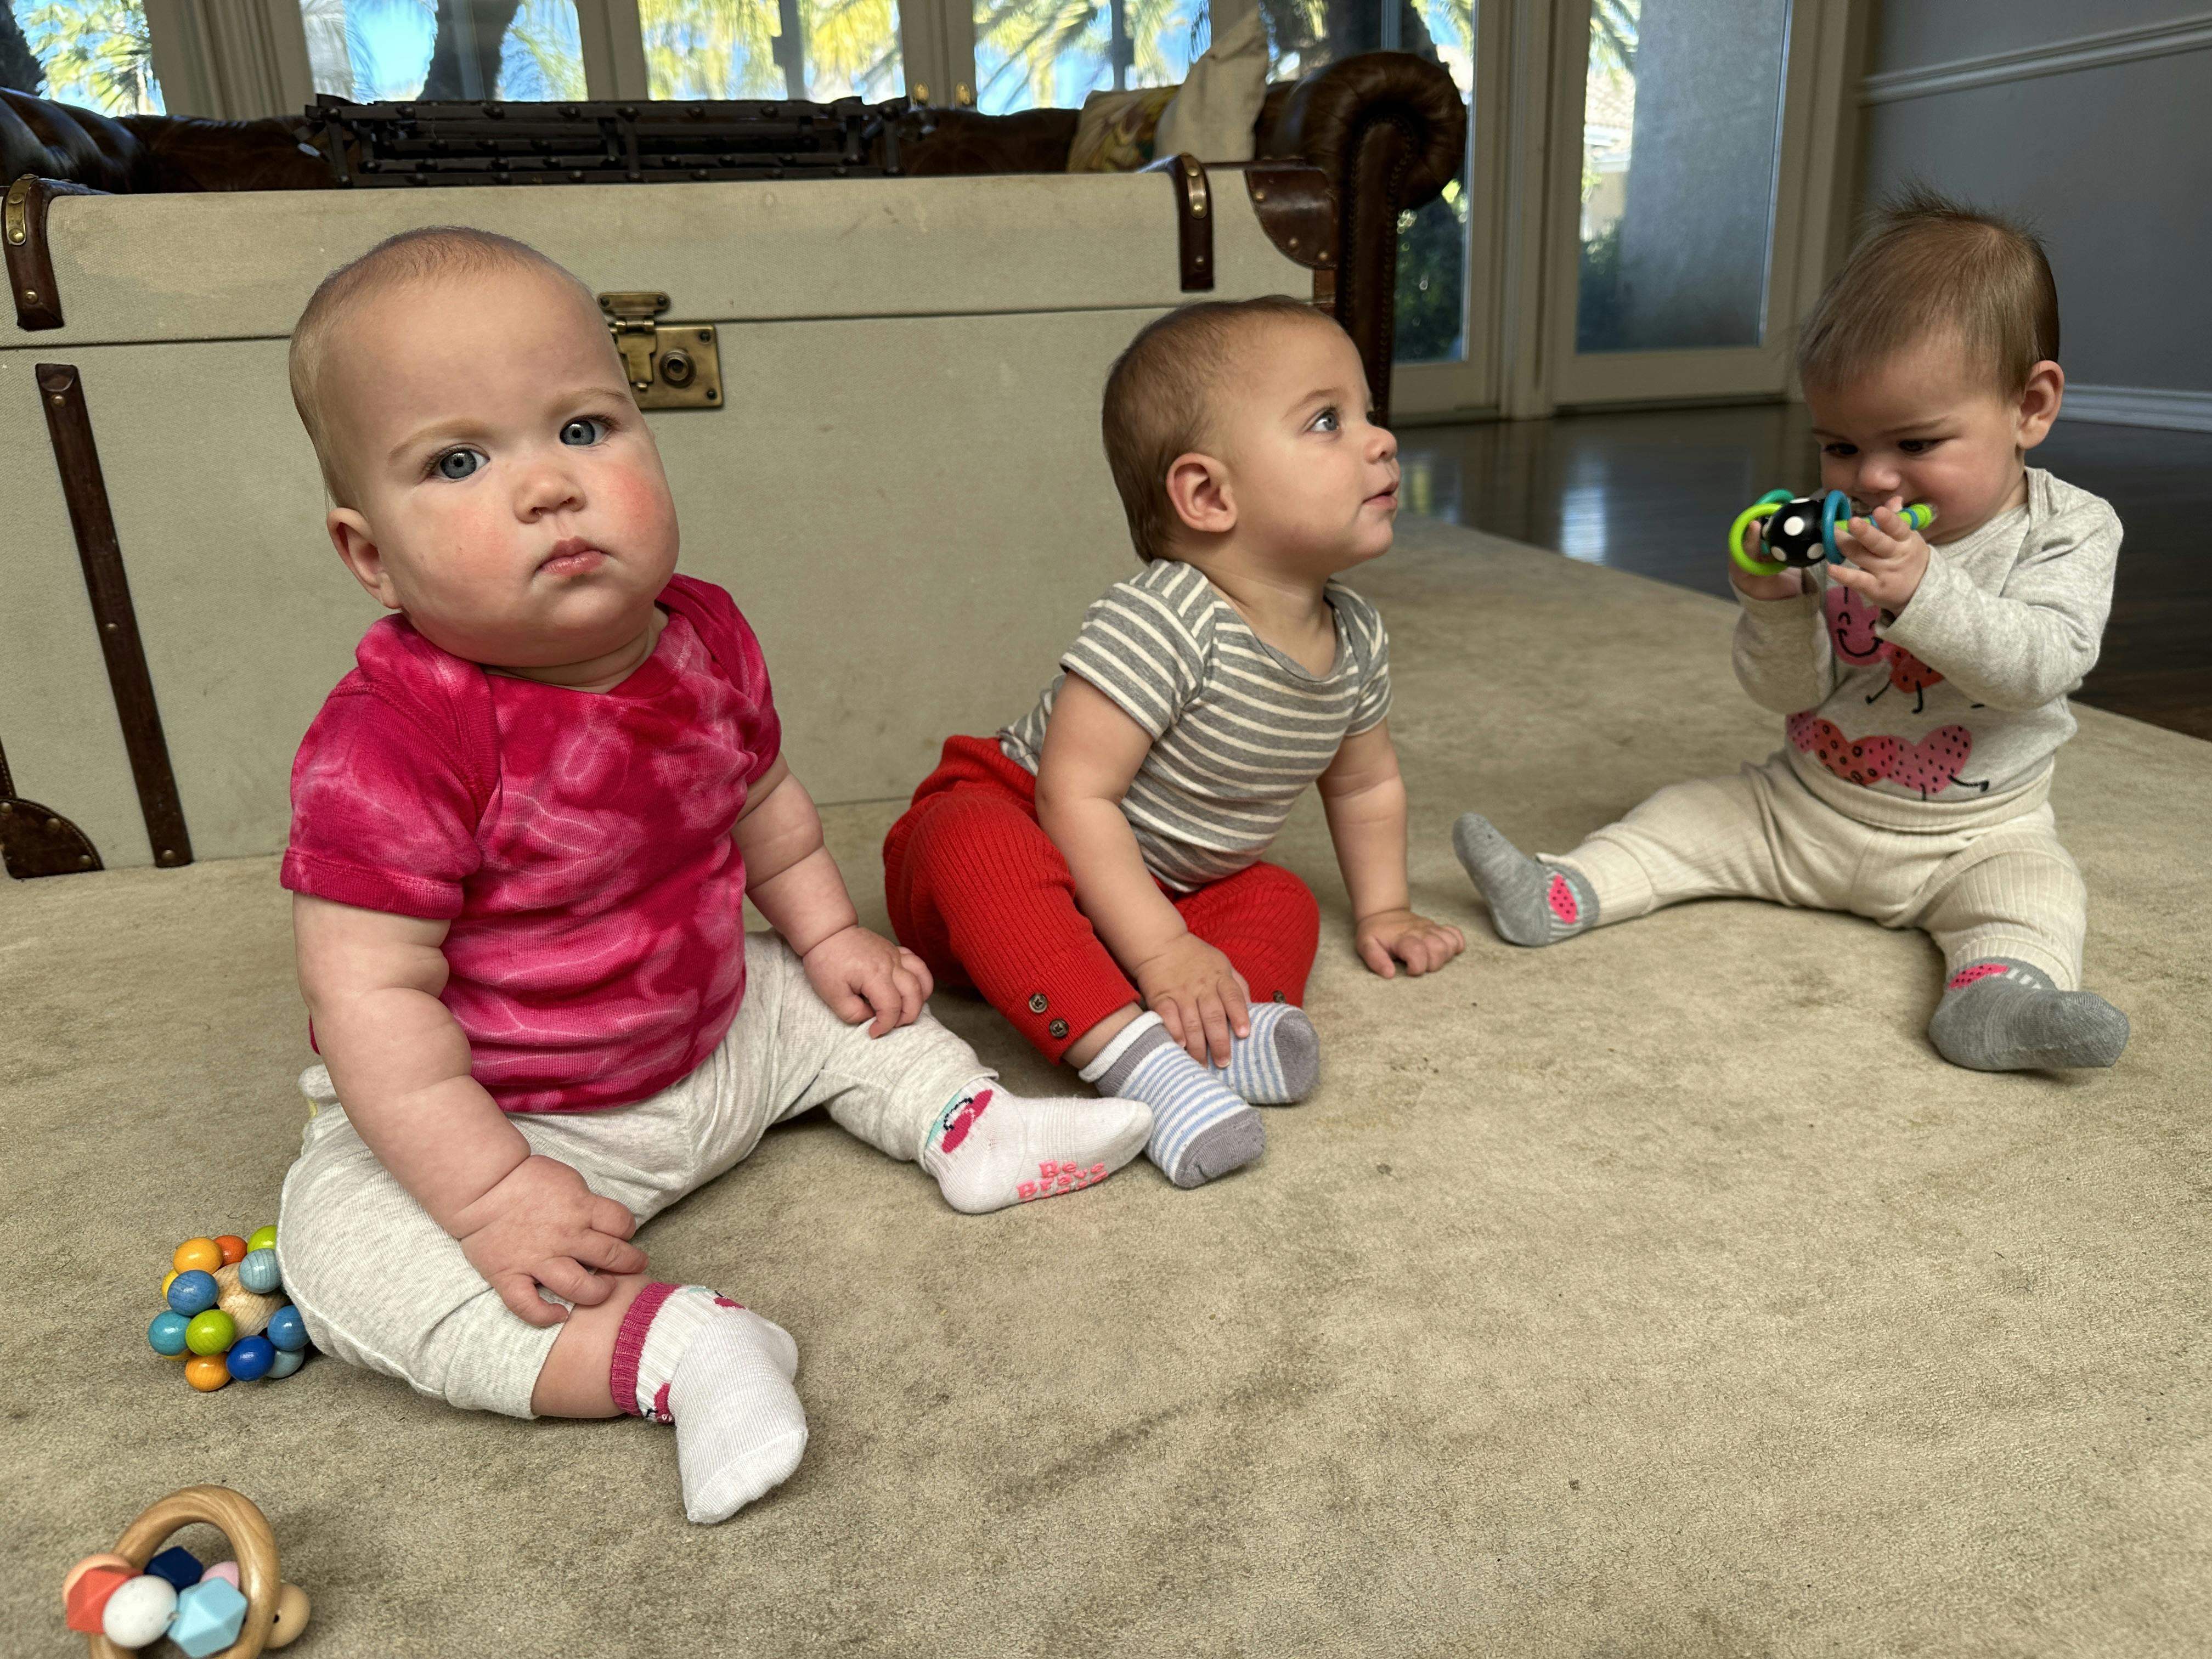 Triplet babies sitting on their own with no support from an adult demonstrating readiness to eat